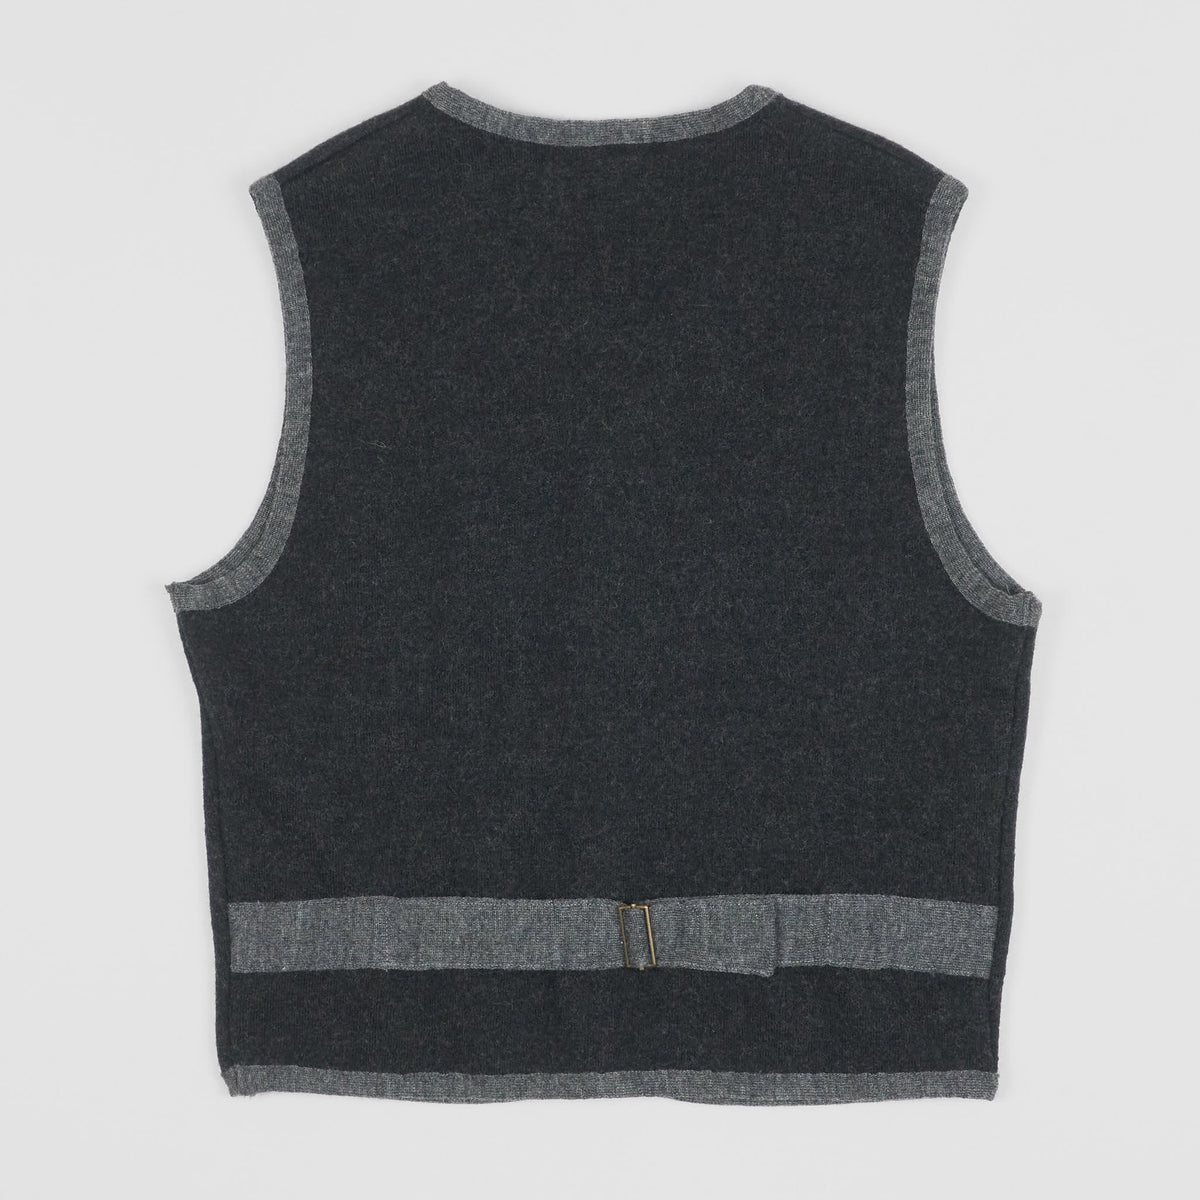 A Piece of Chic Black and Gray Wool Vest